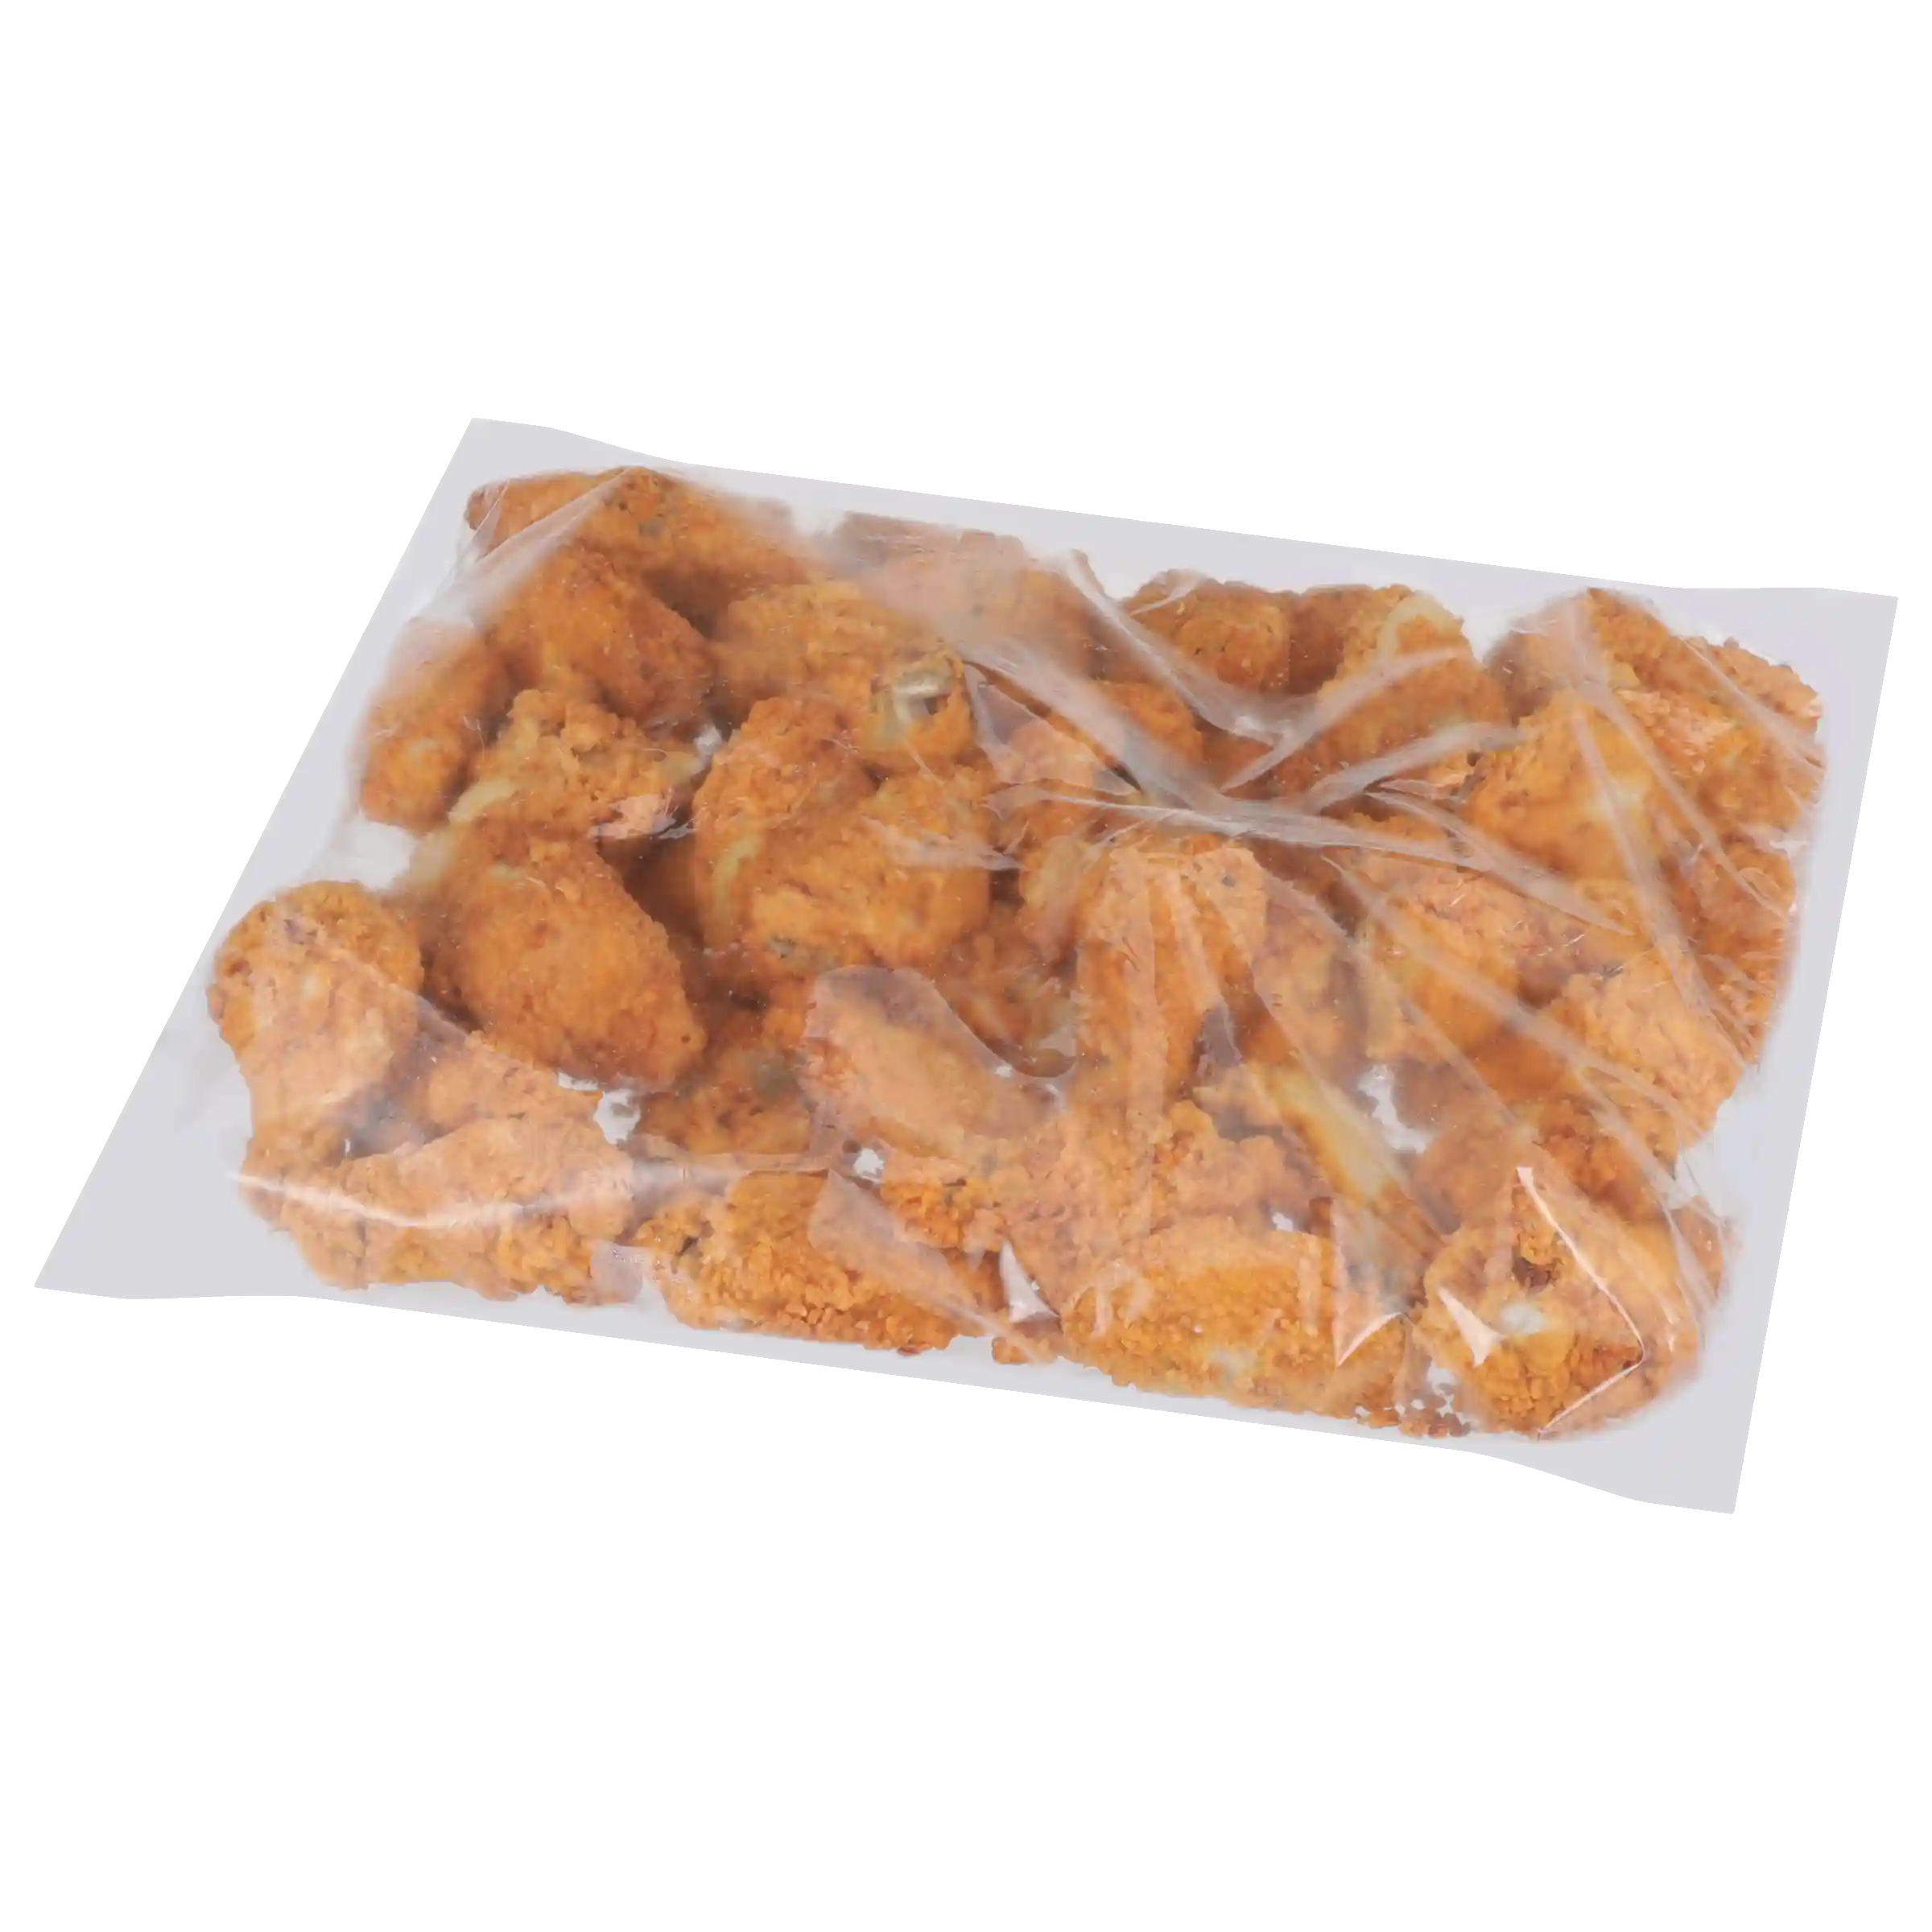 Tyson® Wings of Fire® Fully Cooked Breaded Bone-In Chicken Wing Sections, Medium_image_21